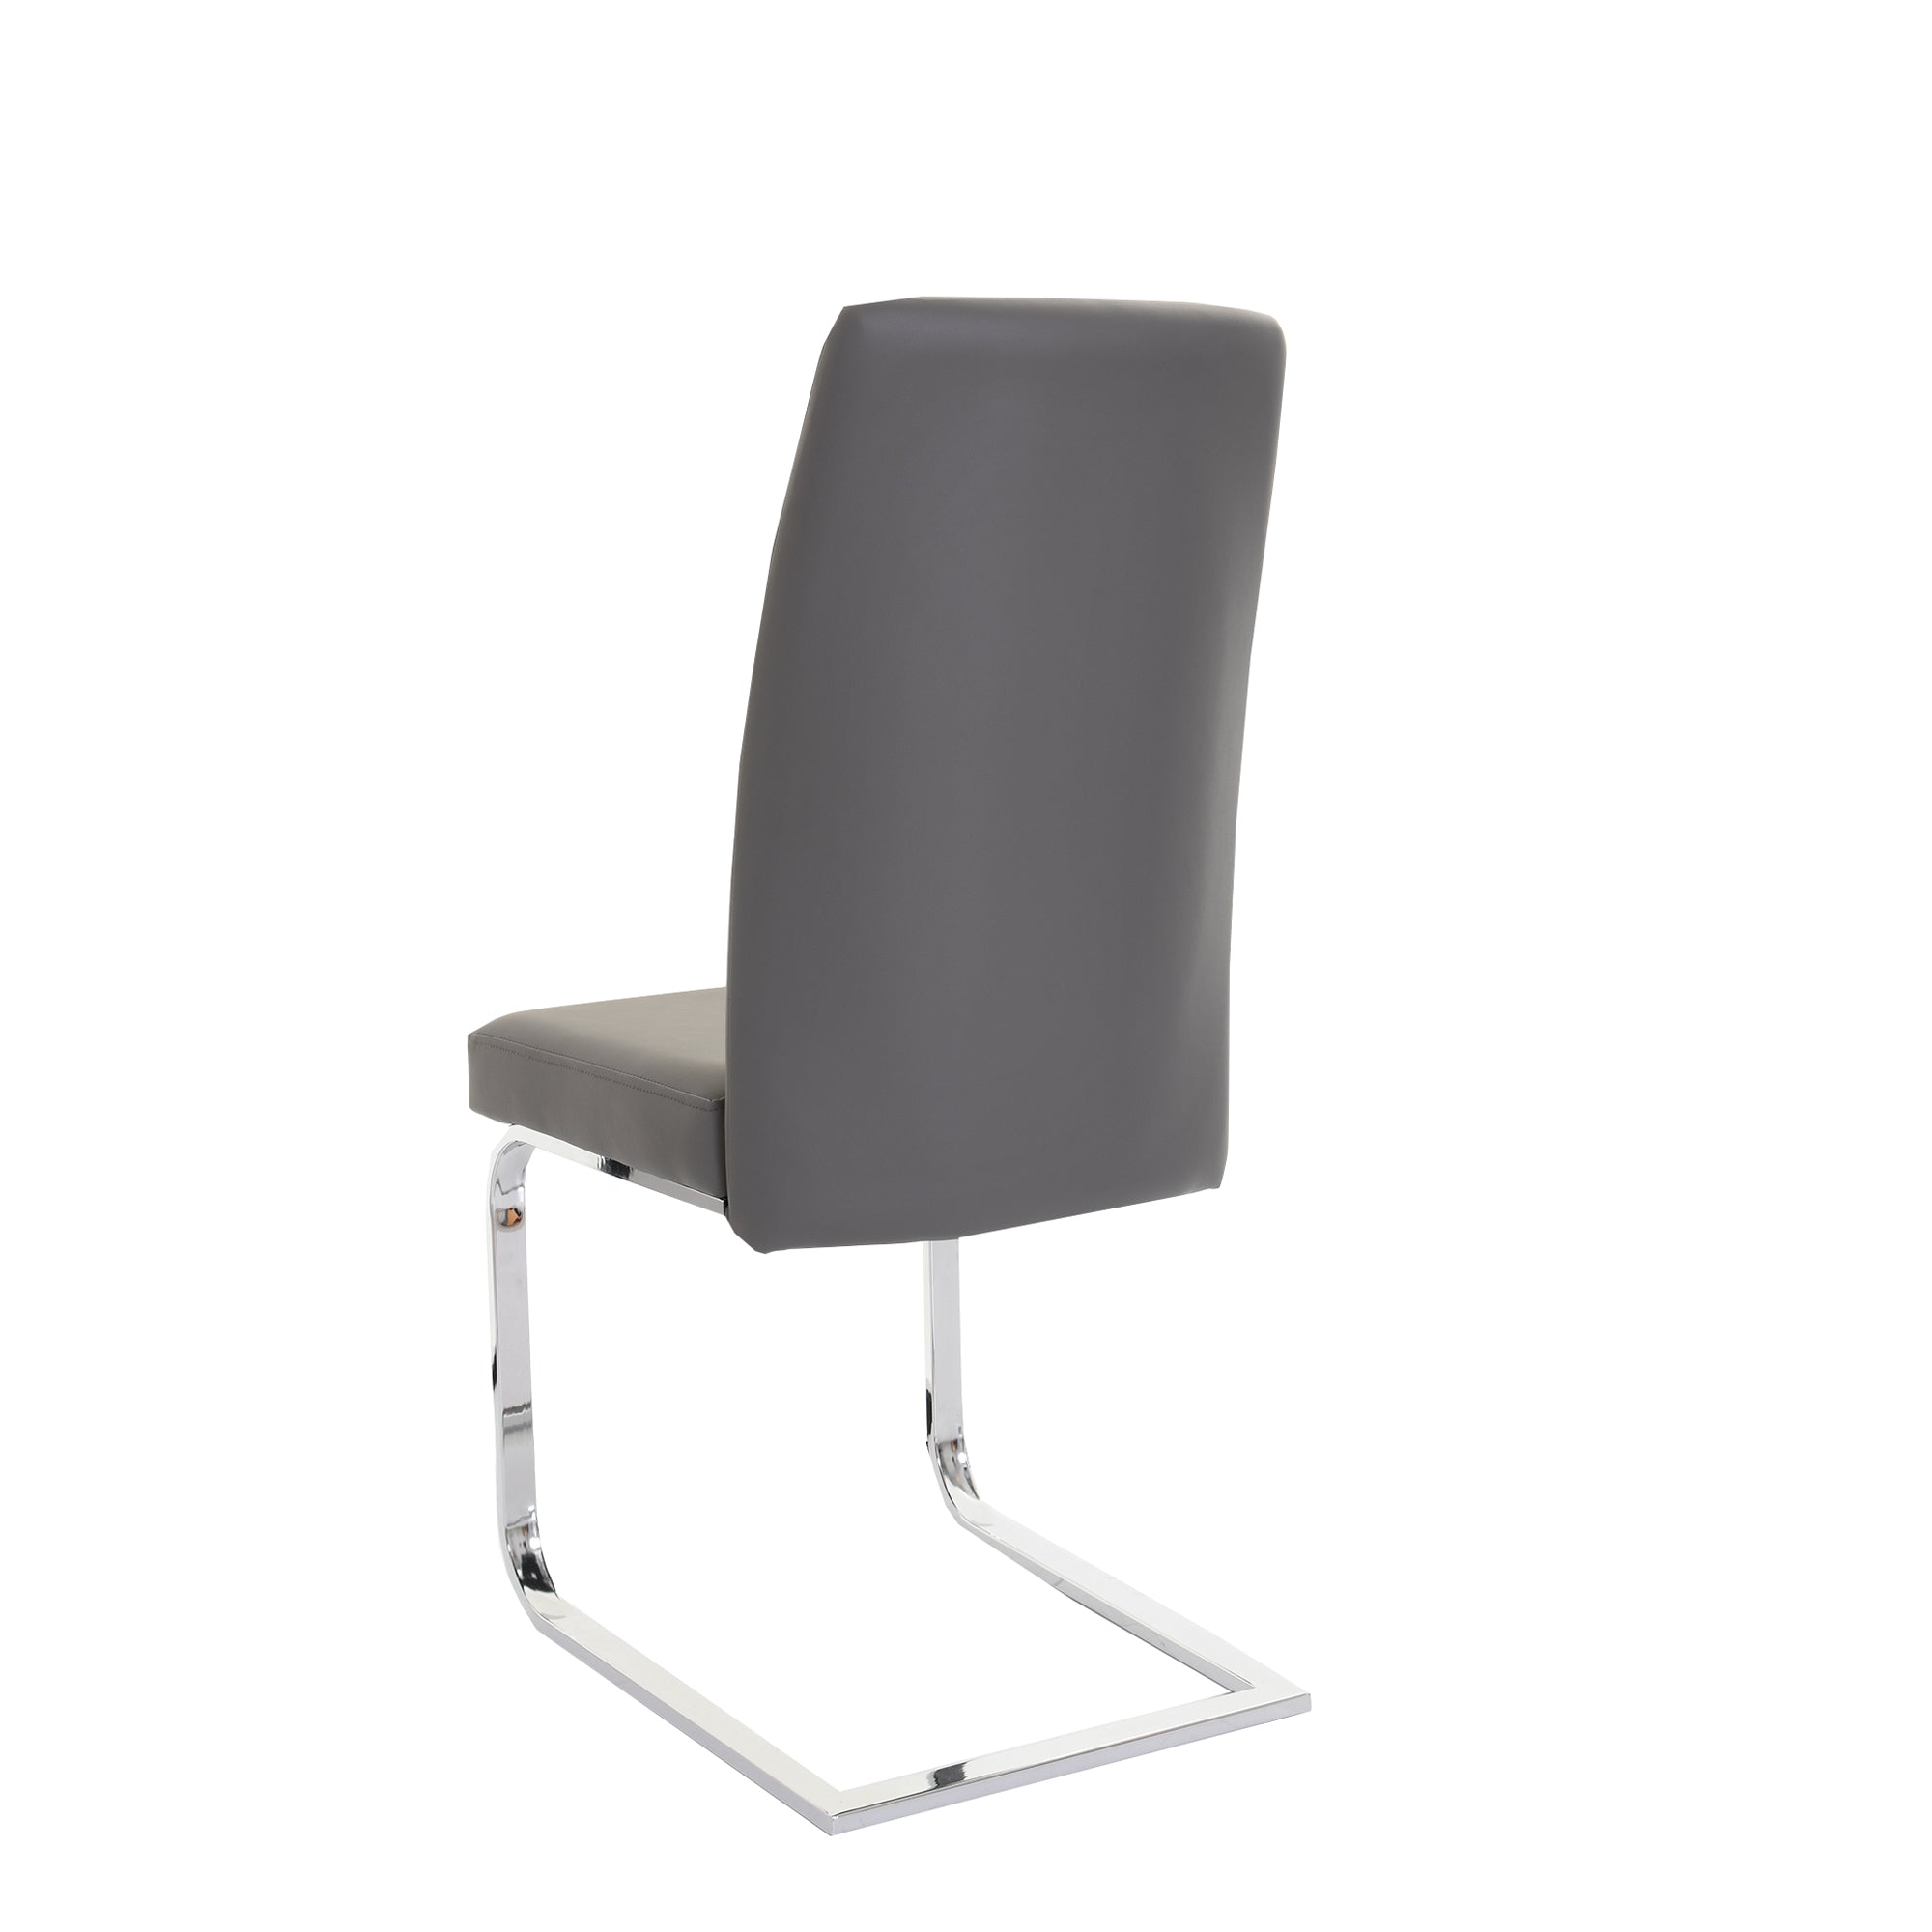 Prato - Cantilever Dining Chair In Dark Grey PU With A Chrome Finished Frame